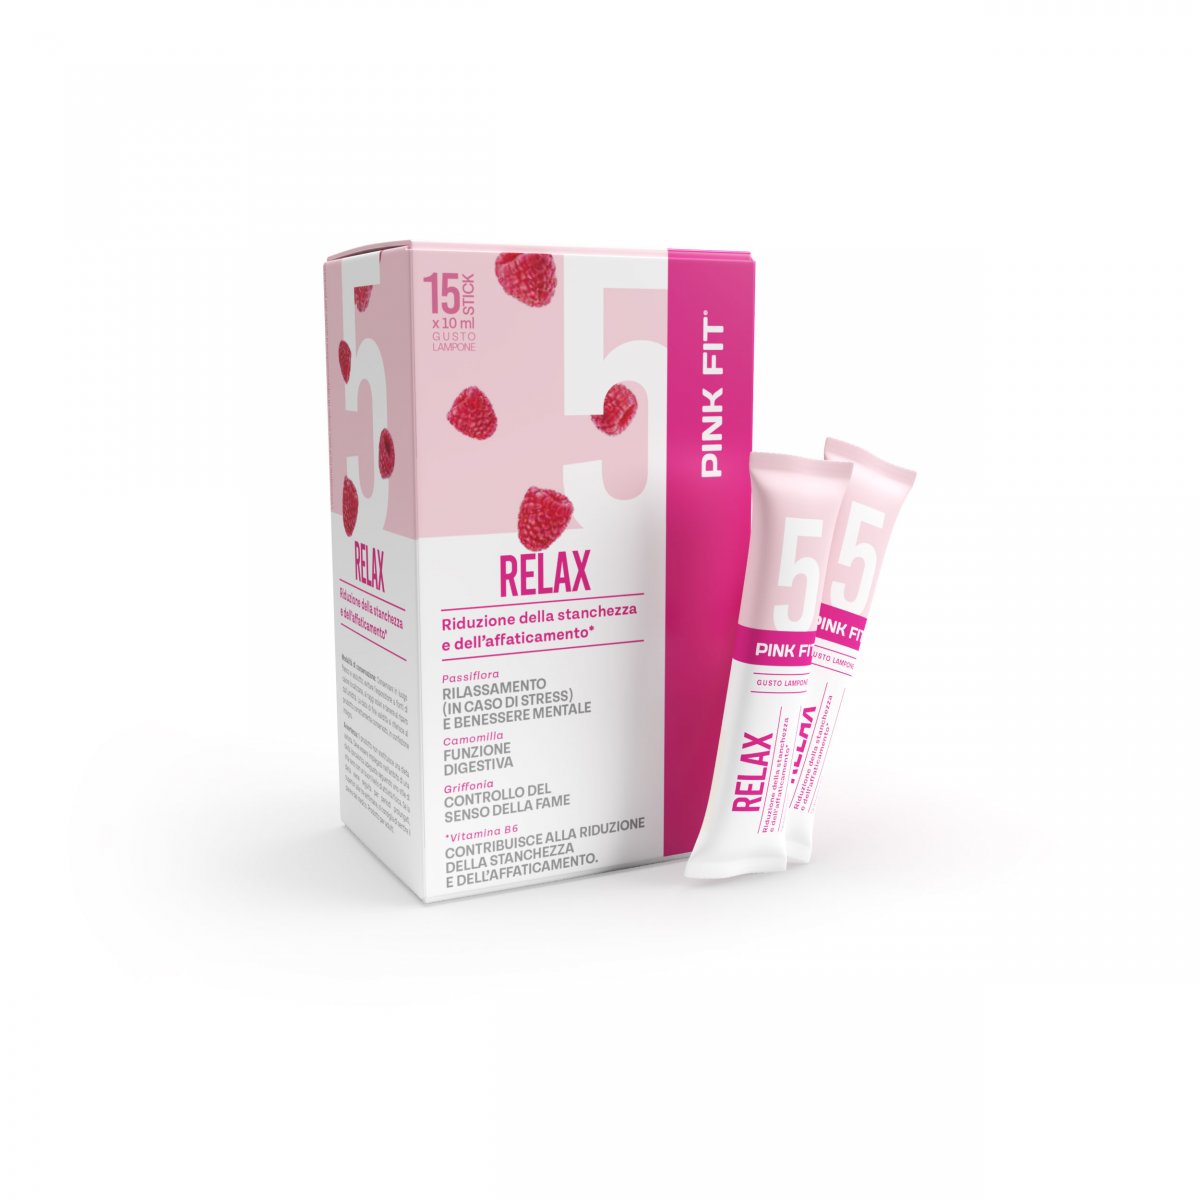 ProAction PINK FIT RELAX - Scatola 15 stick  